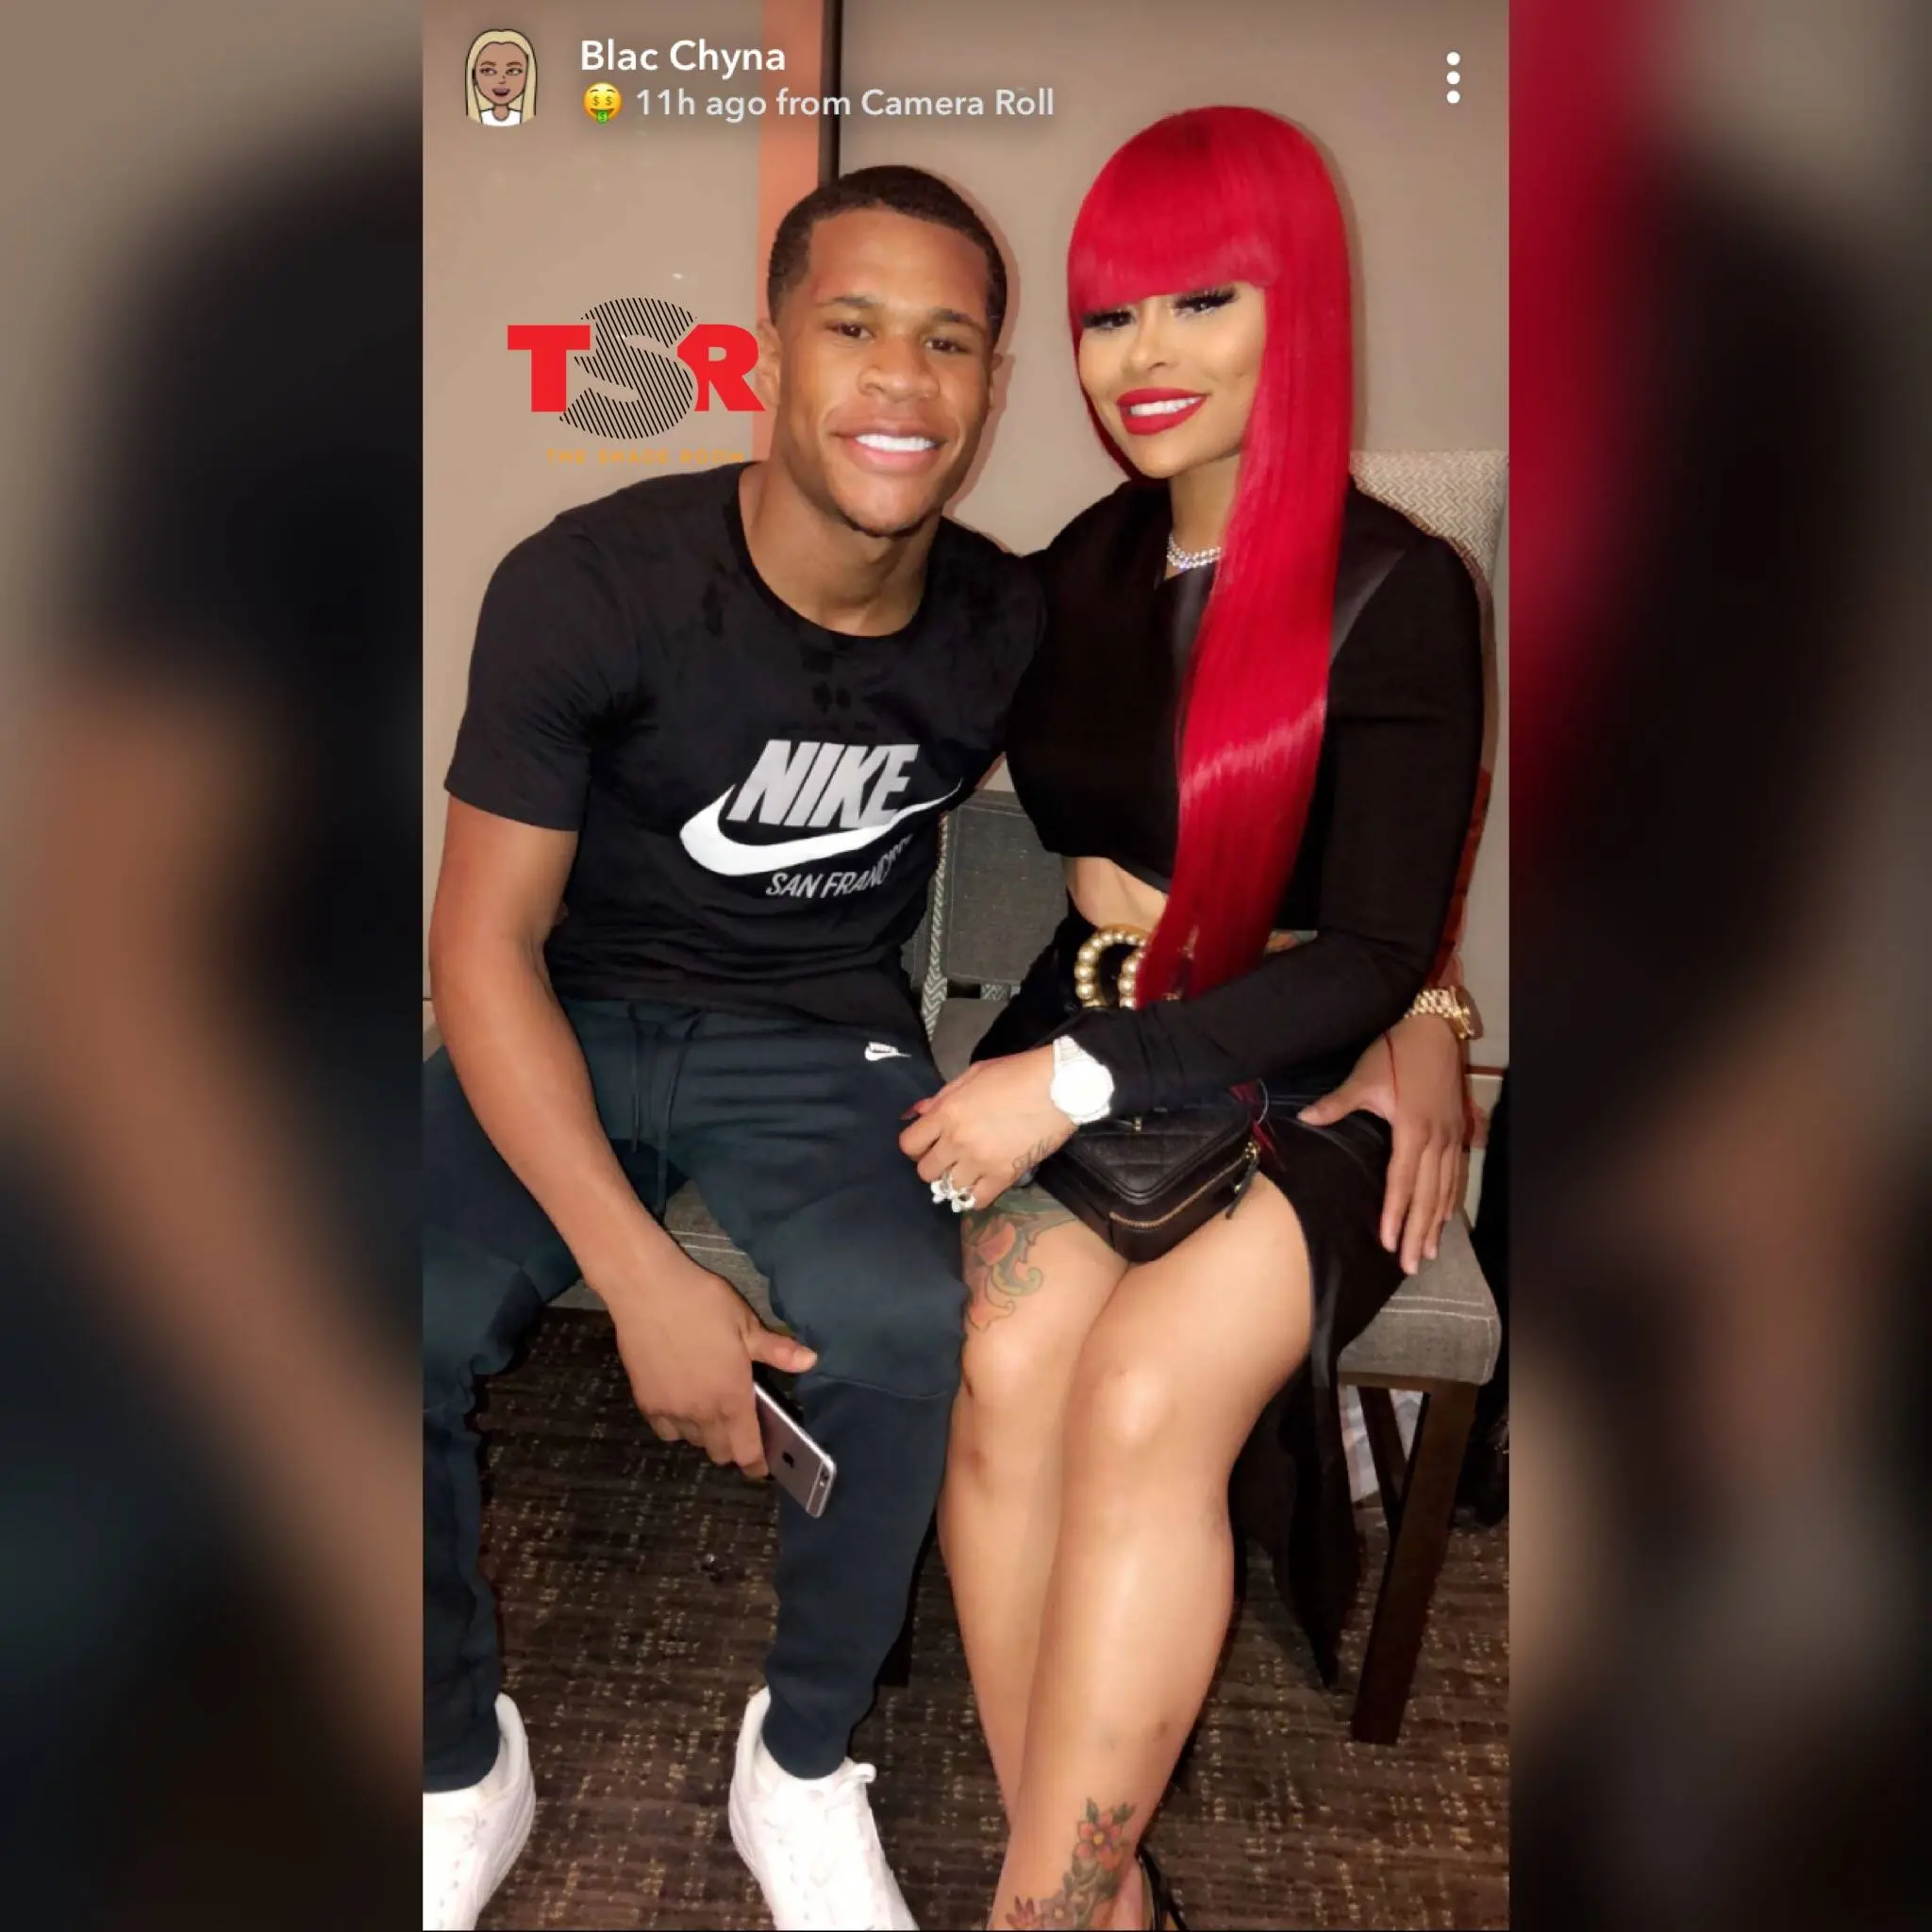 Devin Haney and Blac Chyna were together for a brief period of time